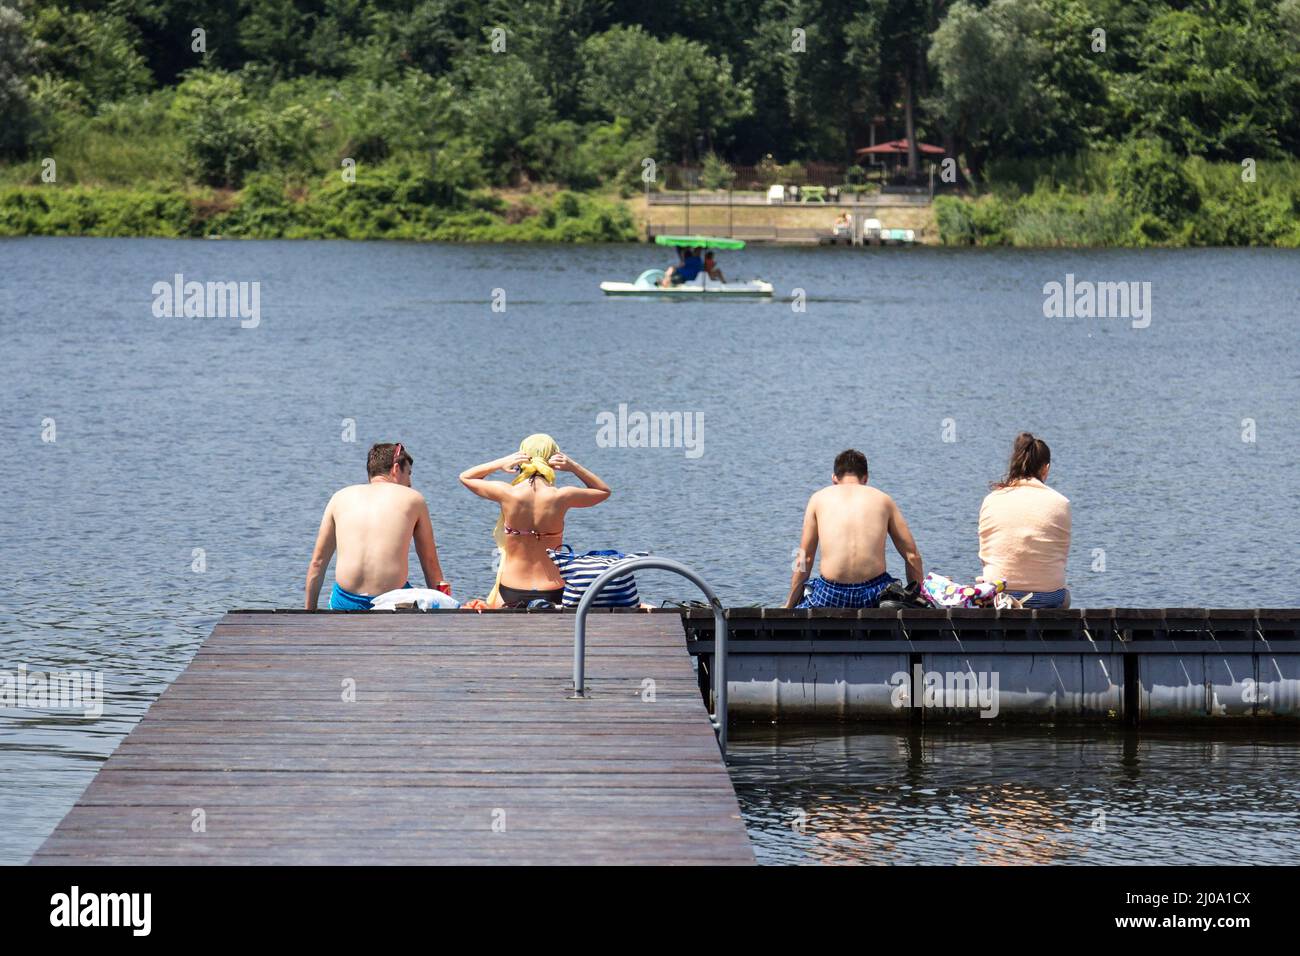 VELIKO GRADISTE, SERBIA - JUNE 26, 2016: Four people in bathing suit in front of Srebrno Jezero, in Serbia, getting ready to swim while on holiday, re Stock Photo